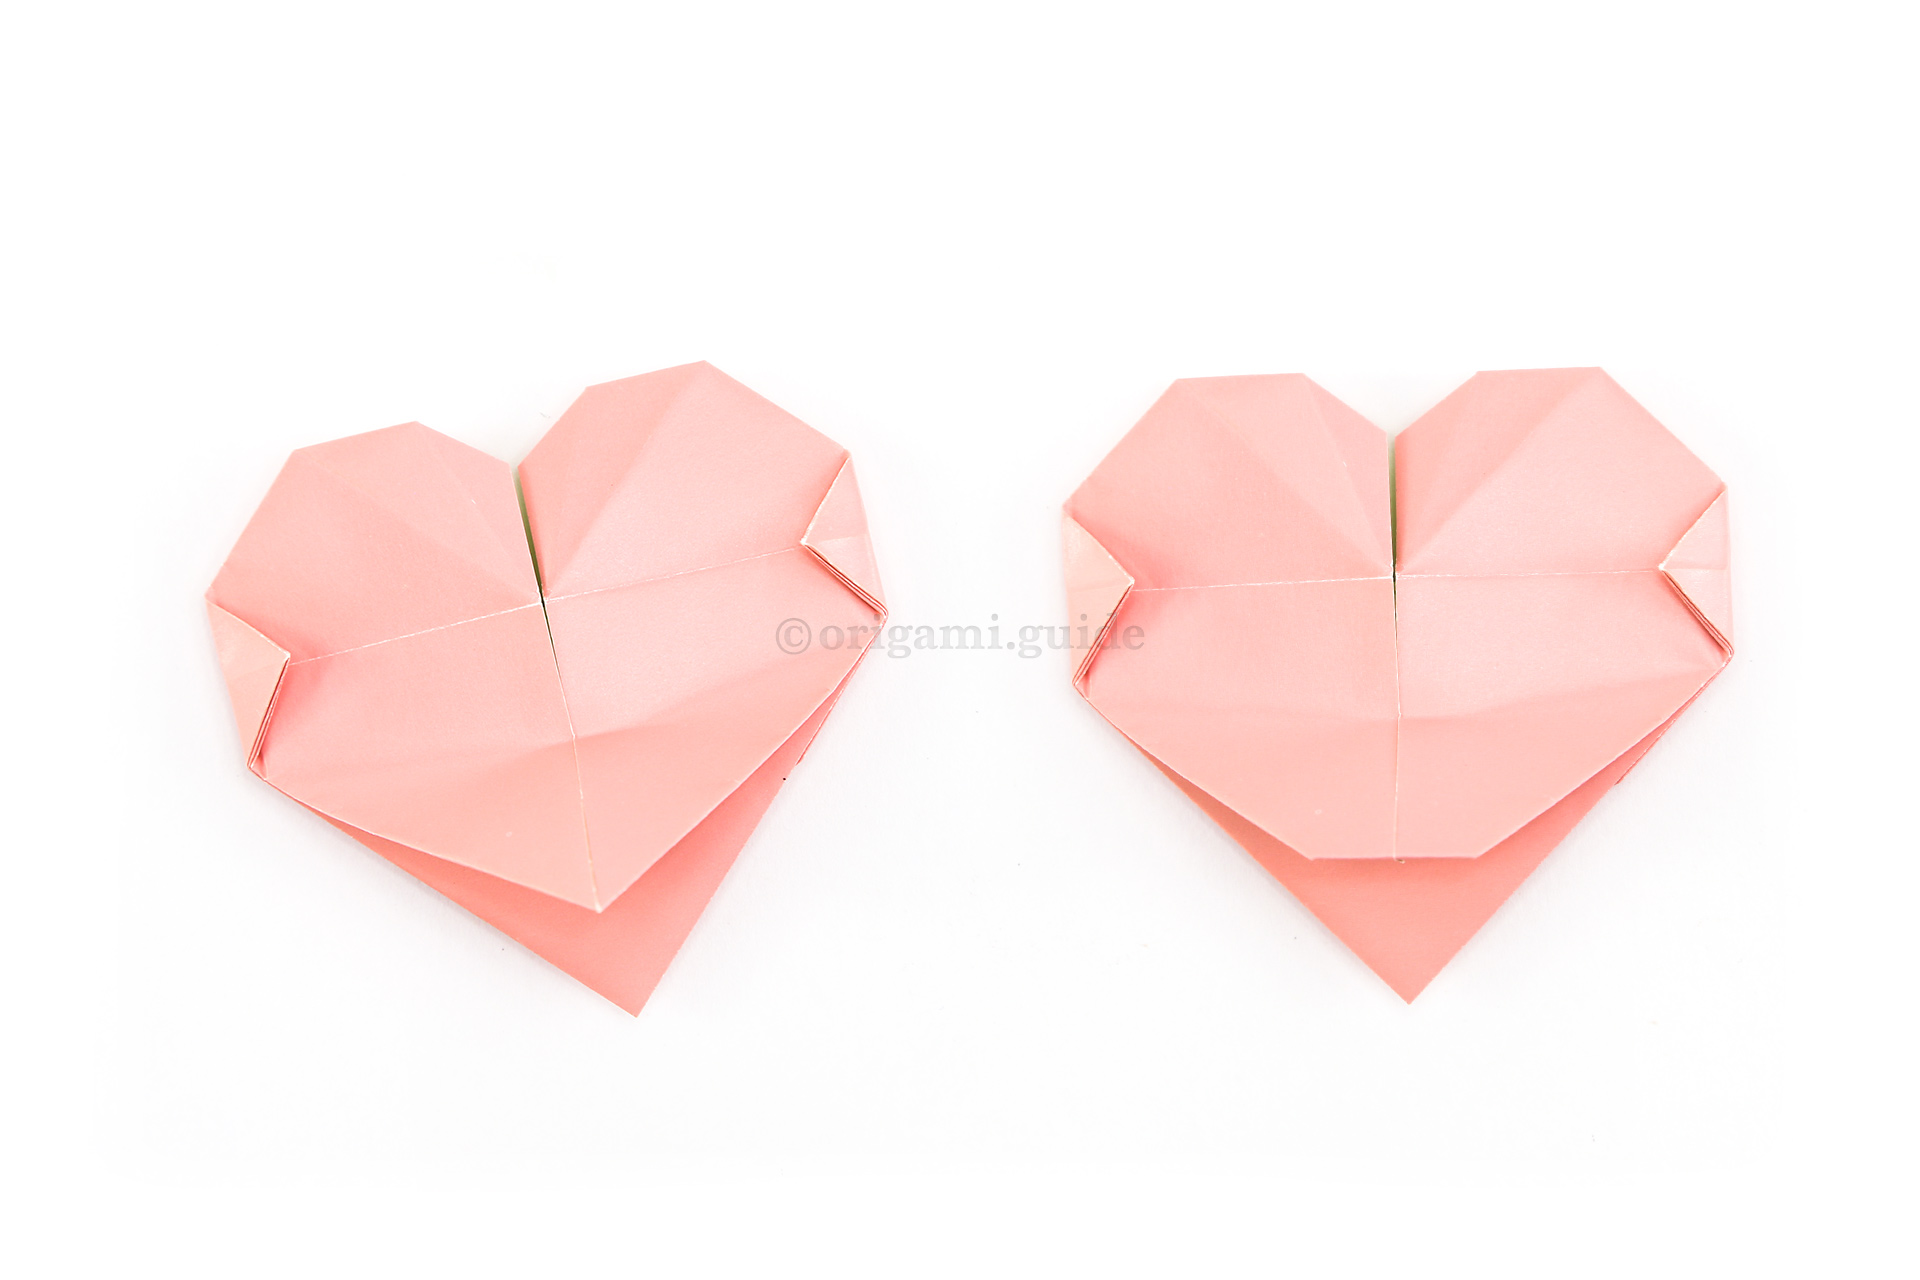 30. If you would like your heart to stand upright, you can fold the back flap up a little. Then fold the bottom point under to create a stand.